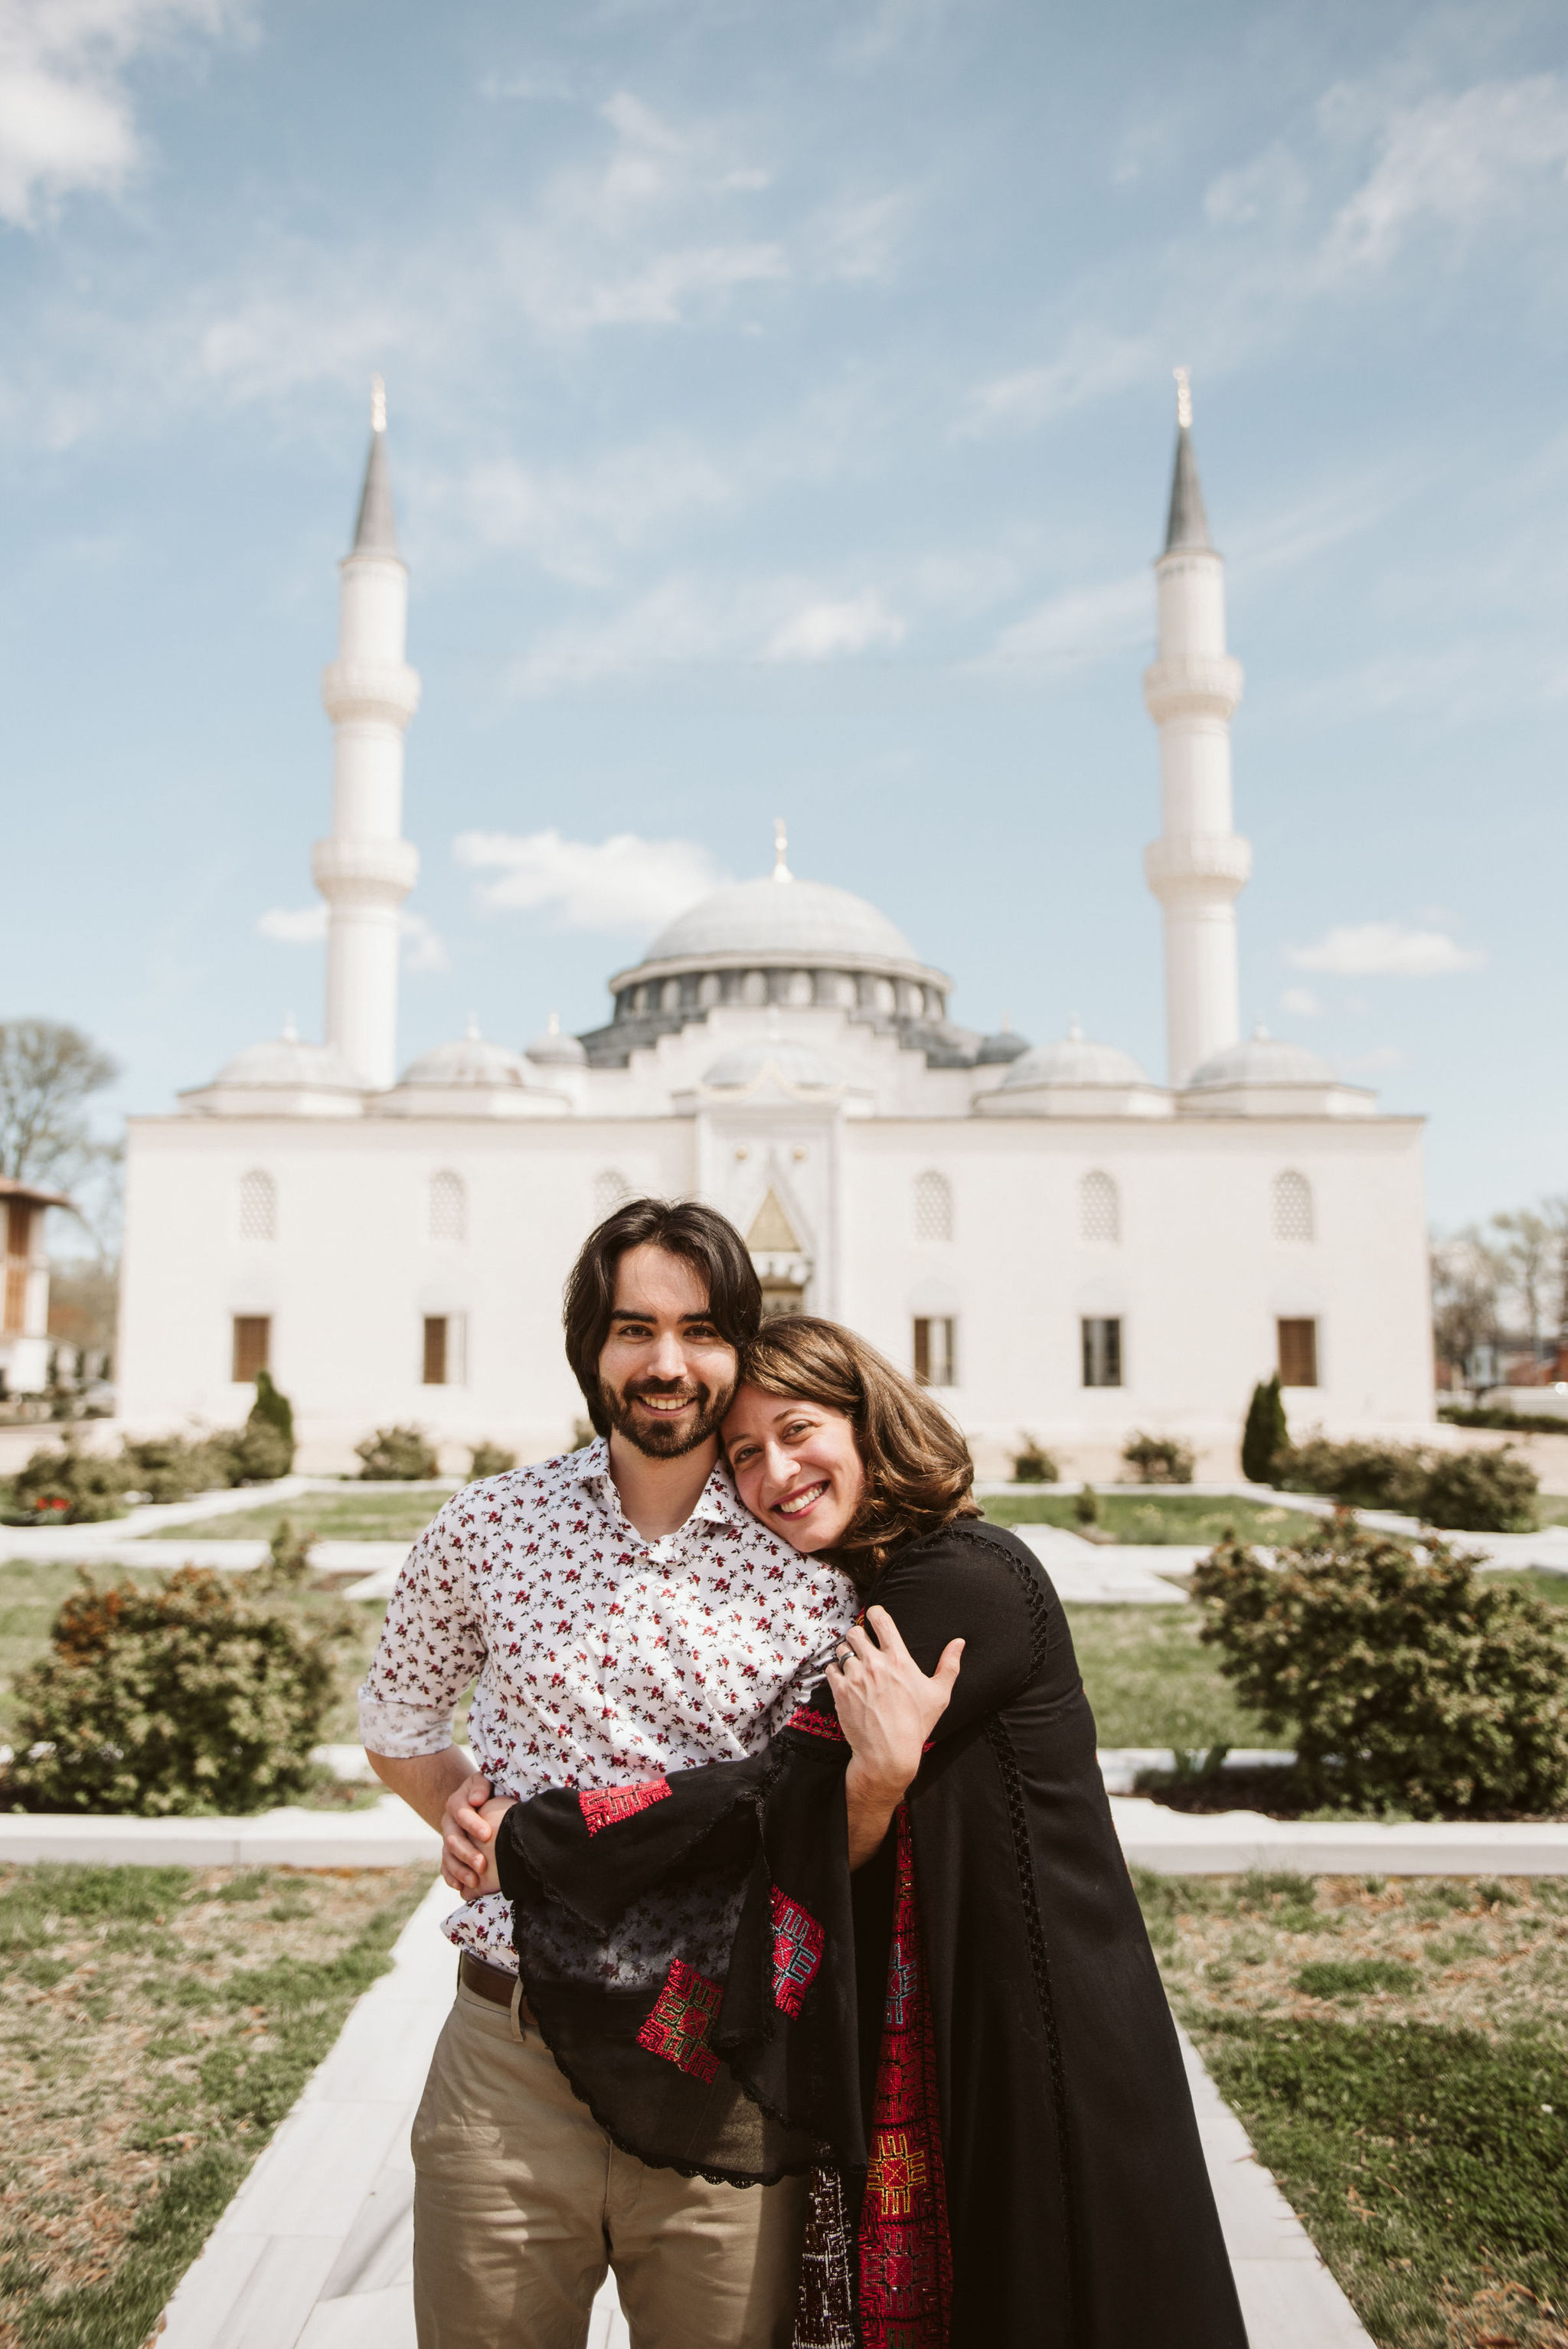  Washington DC, Baltimore Wedding Photographer, Diyanet Center of America, Spring, Intimate Wedding, Traditional, Classic, Palestinian, Turkish Design, Bride and Groom Hugging in the Garden, Just Married 